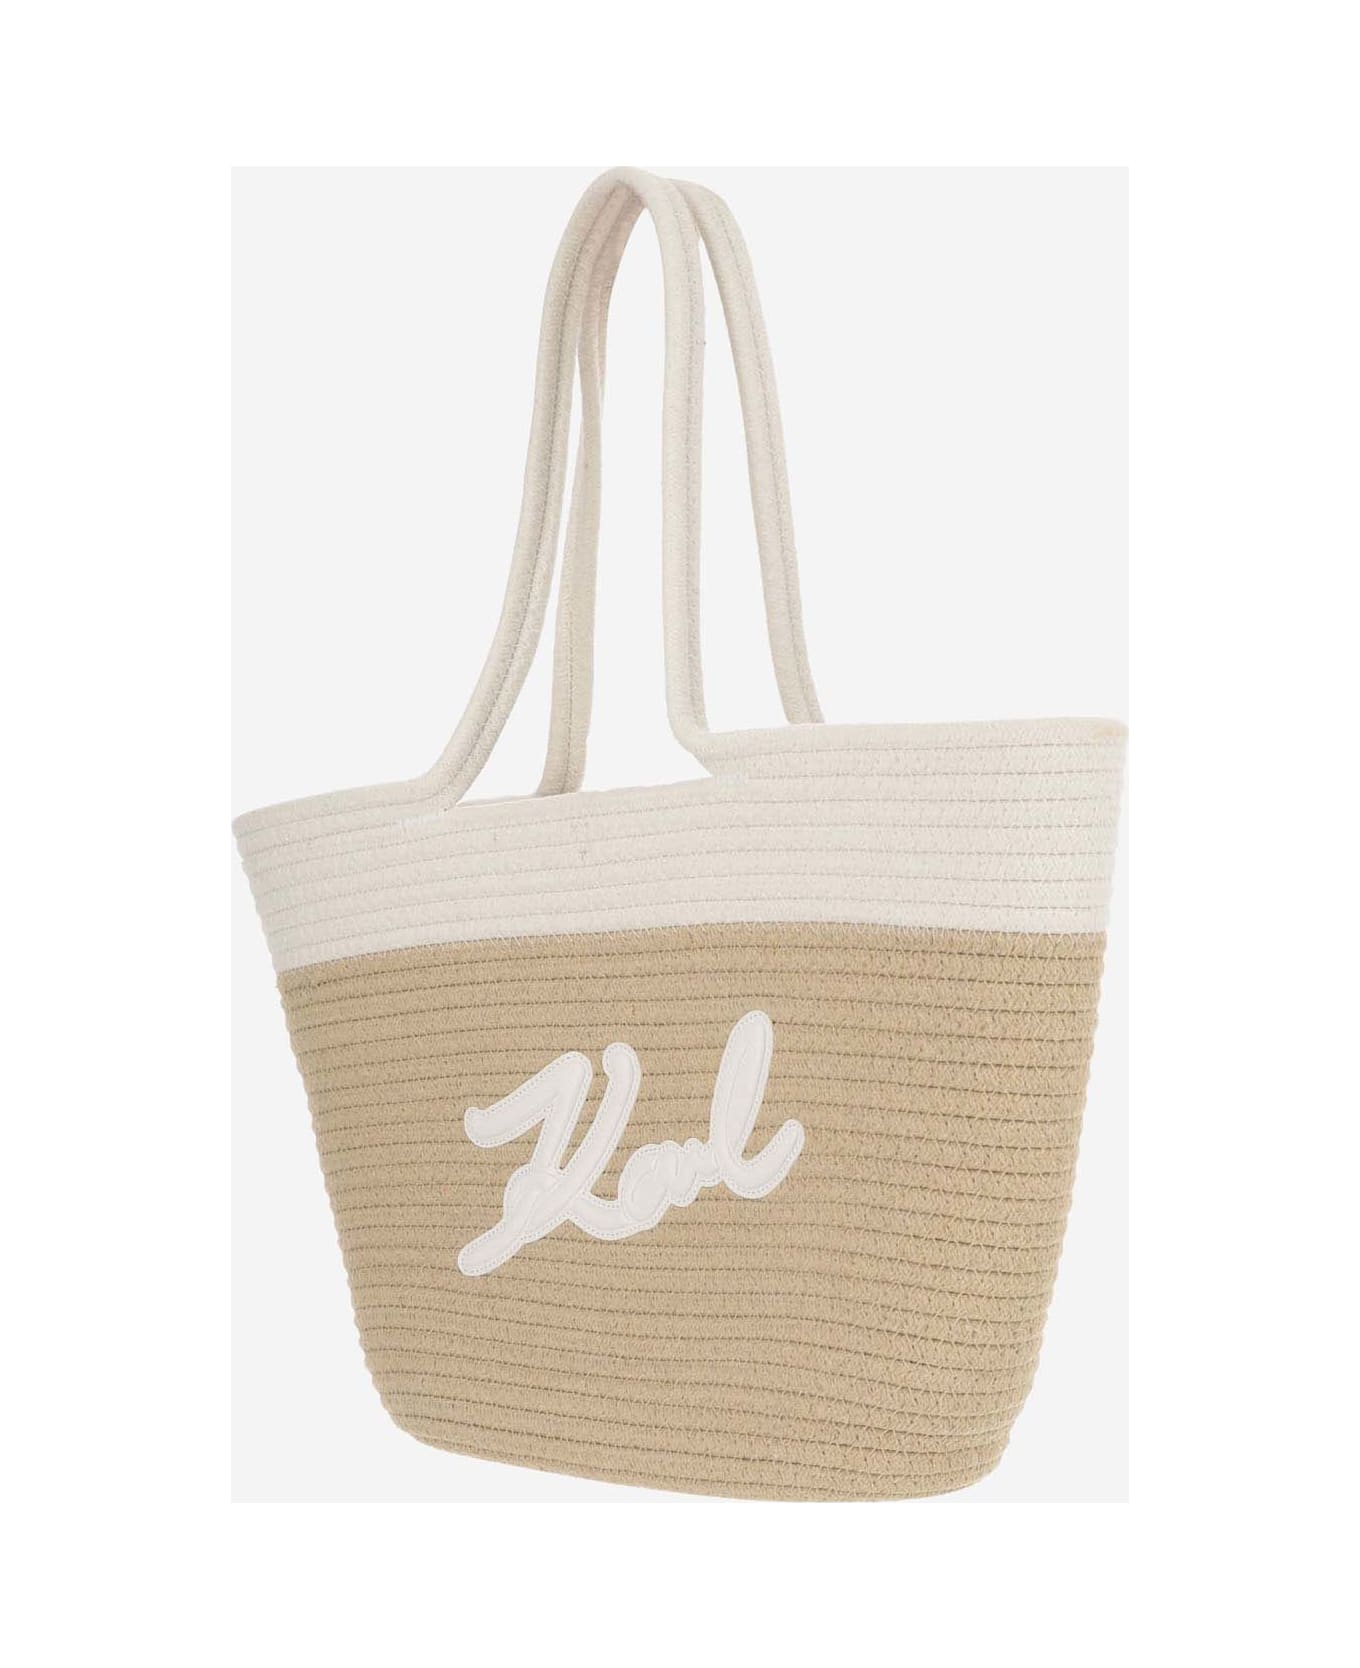 Karl Lagerfeld Fabric Tote Bag With Logo - White